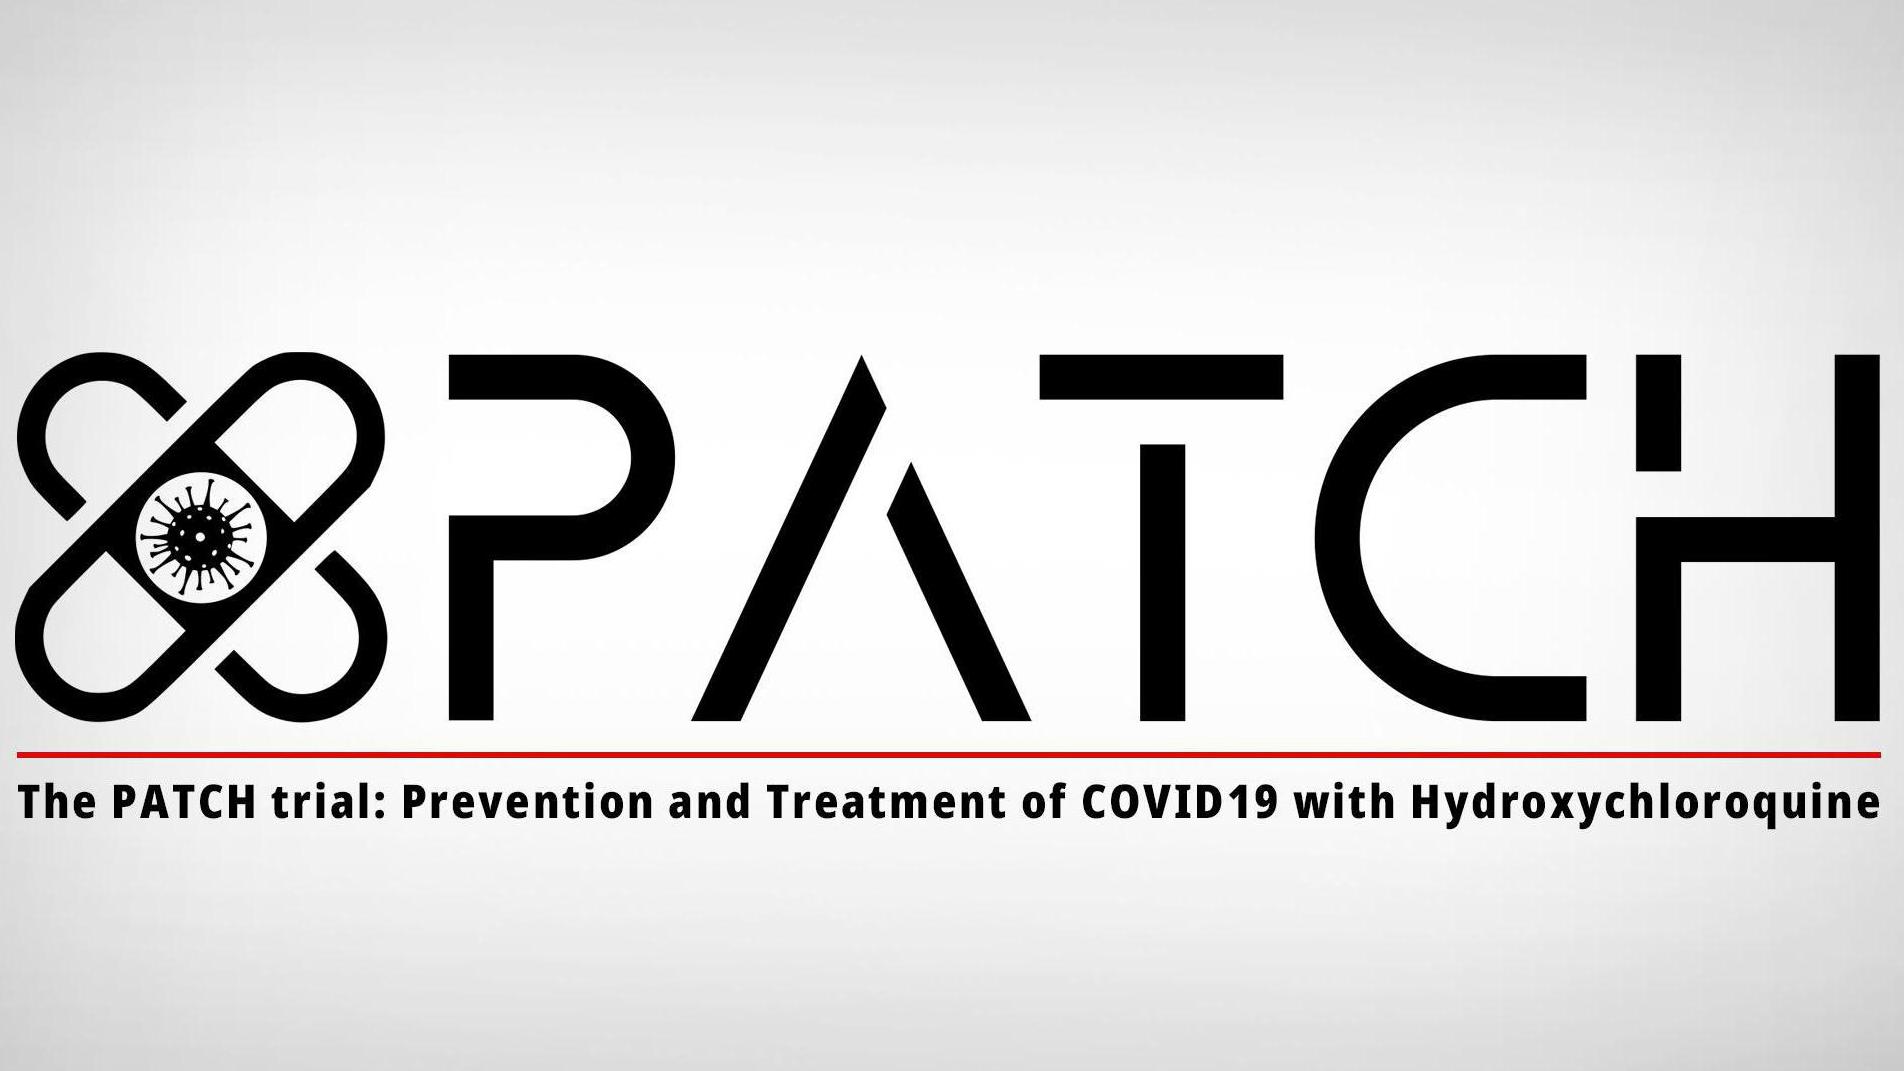 The PATCH trial for Healthcare Workers (Prevention and Treatment of COVID-19 with hydroxychloroquine)